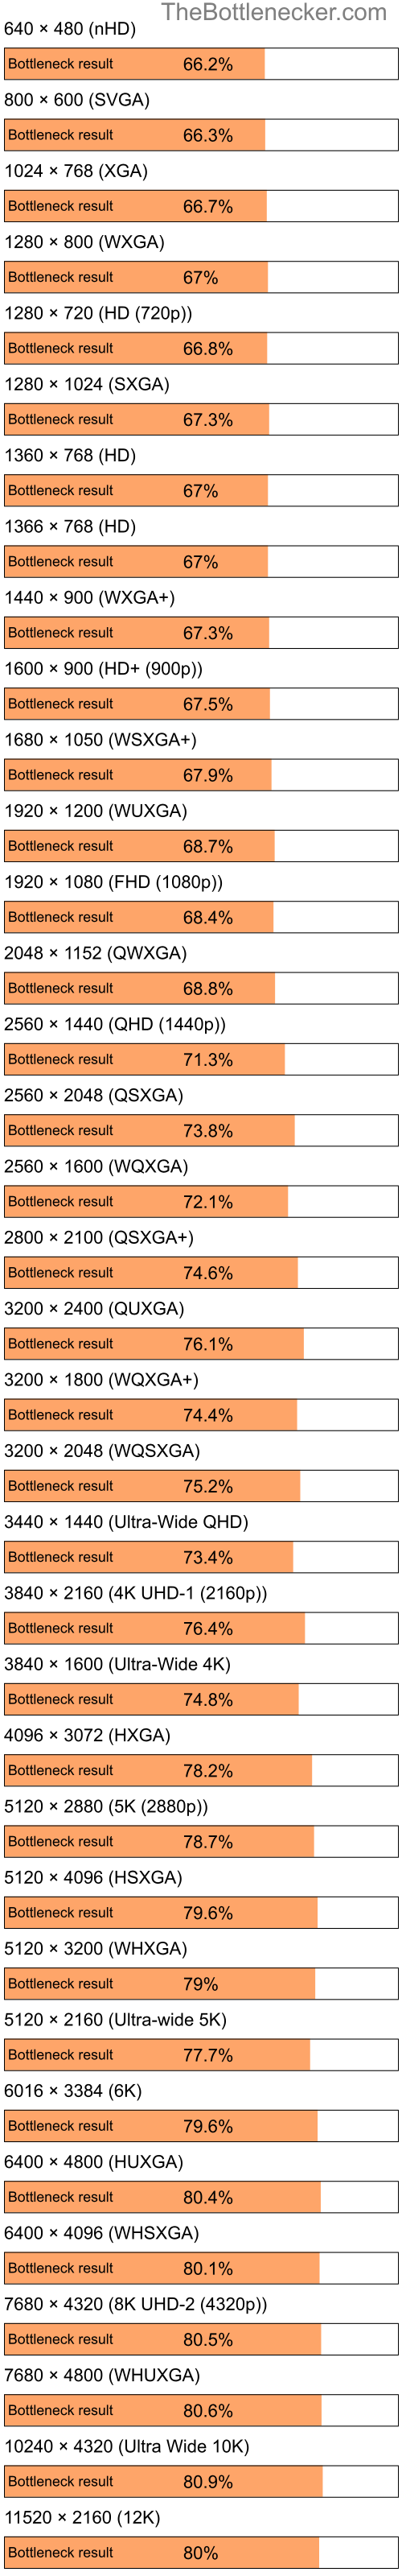 Bottleneck results by resolution for Intel Pentium 4 and NVIDIA Quadro FX 3000 in General Tasks